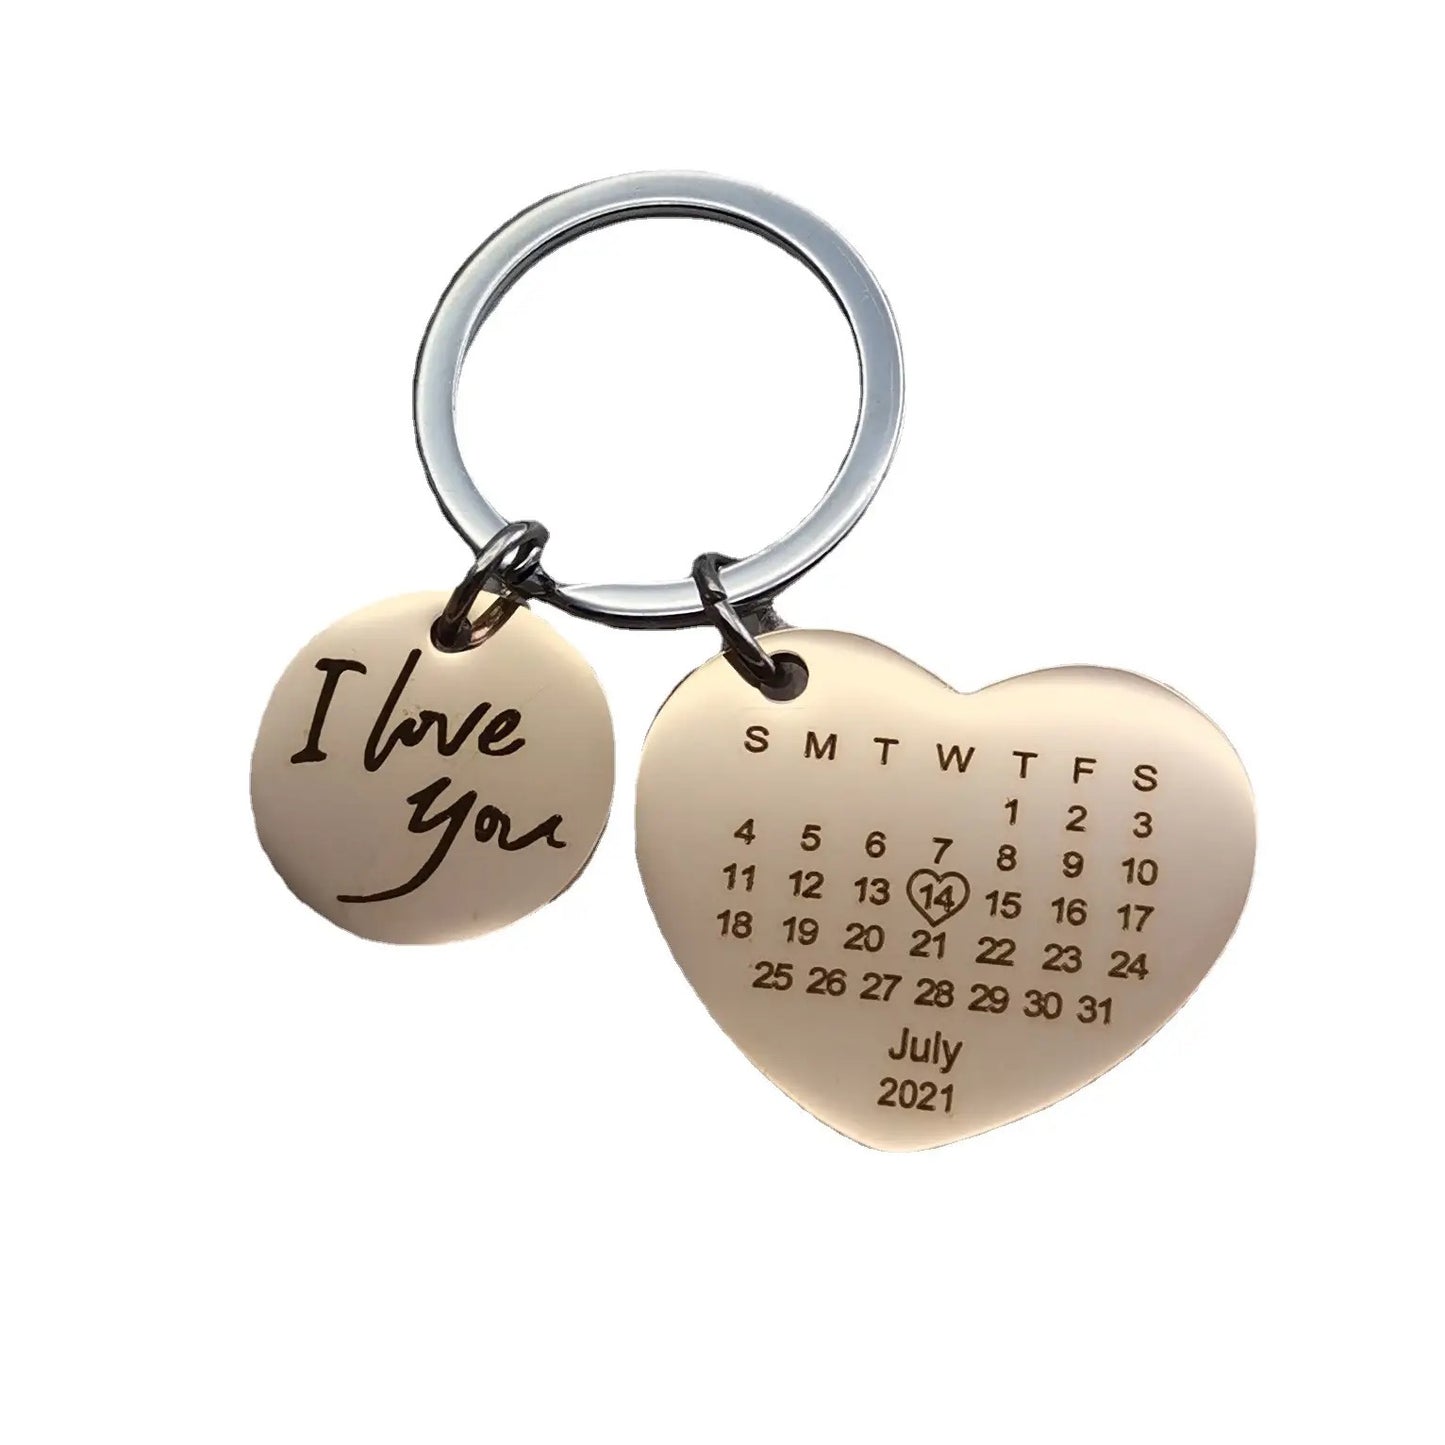 The Day We Met/Married/Engaged Keychain